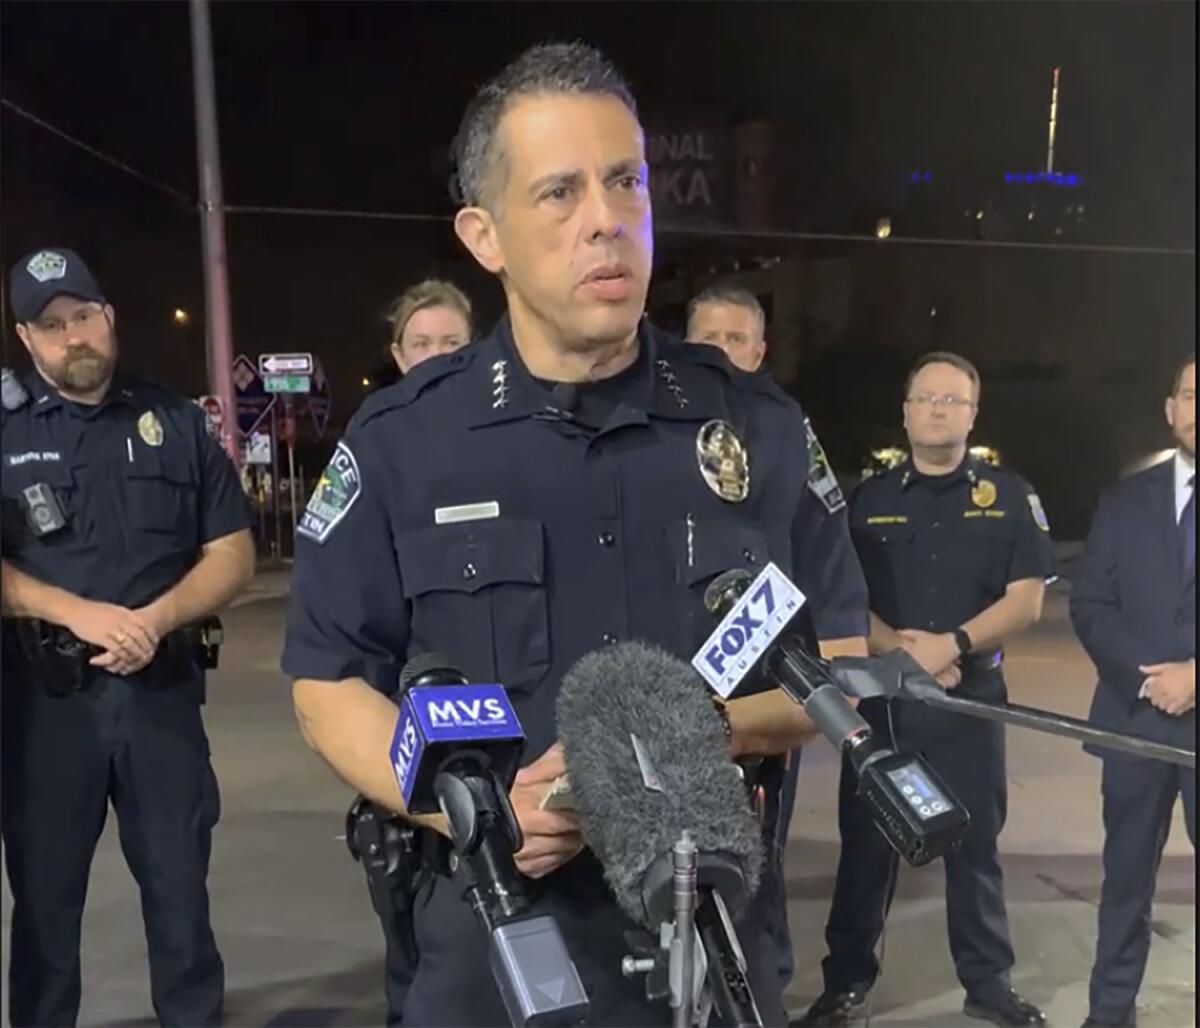 Police Chief Joseph Chacon speaks in front of microphones with several officers behind him